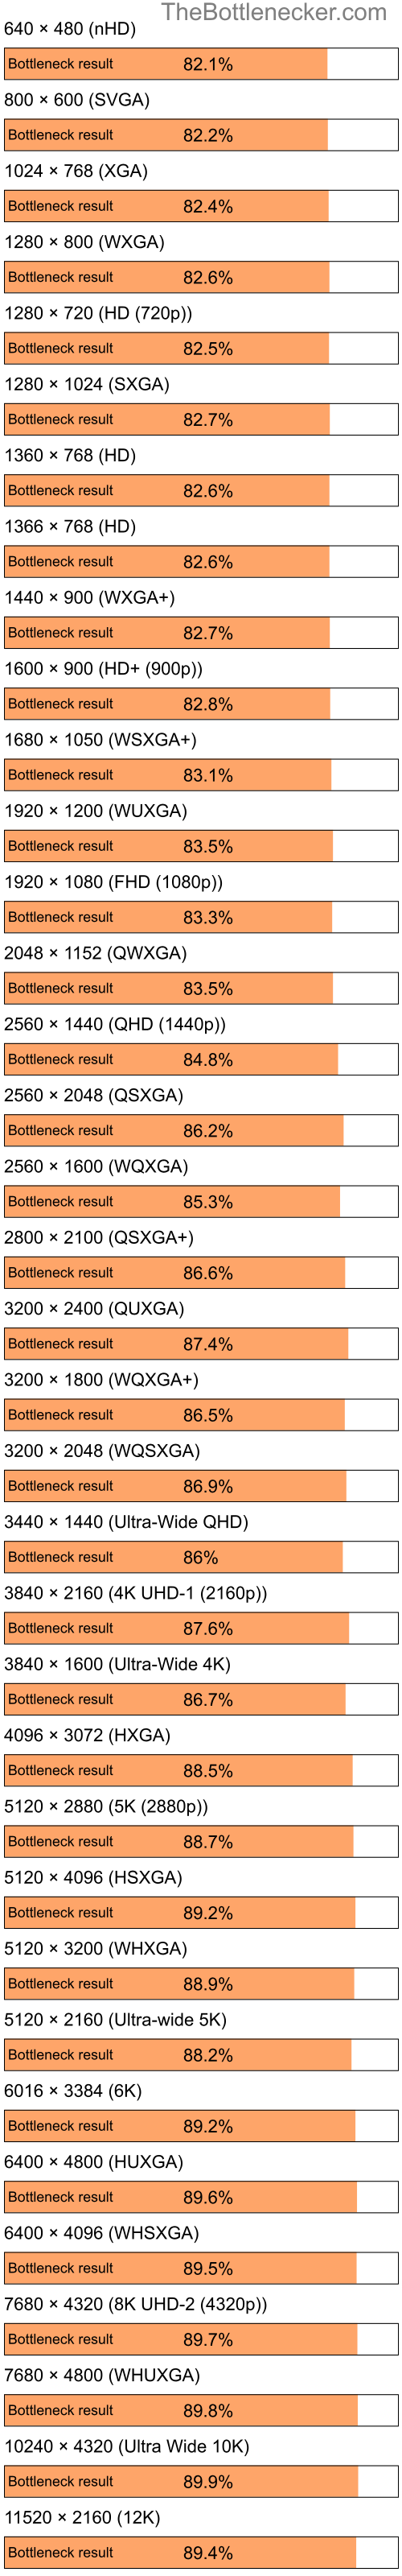 Bottleneck results by resolution for Intel Pentium 4 and NVIDIA GeForce 7050 in Graphic Card Intense Tasks